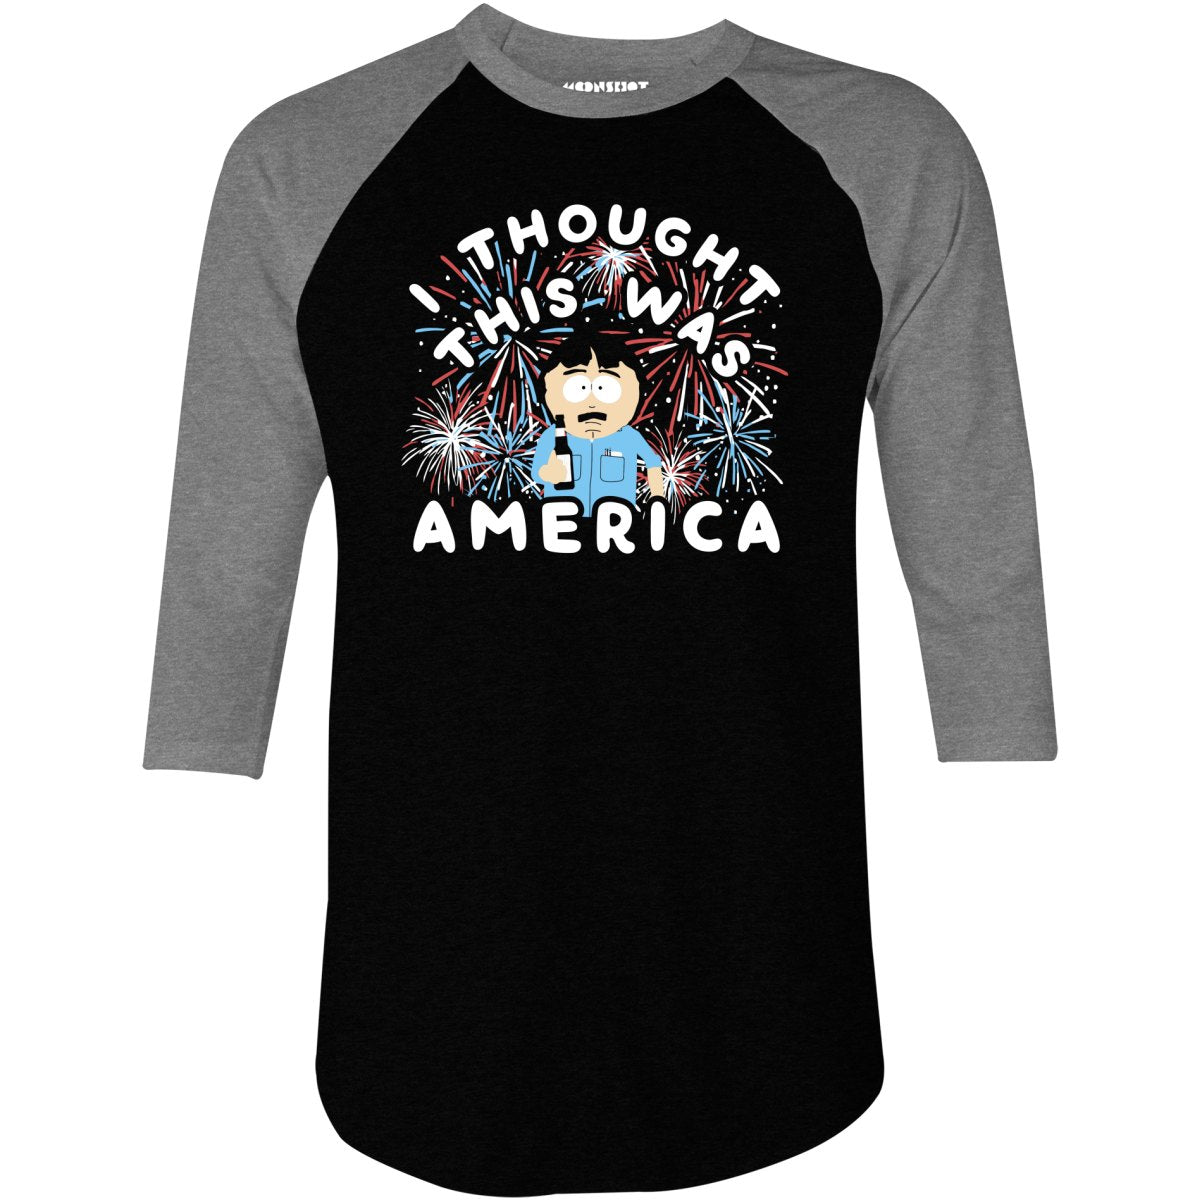 I Thought This Was America - 3/4 Sleeve Raglan T-Shirt